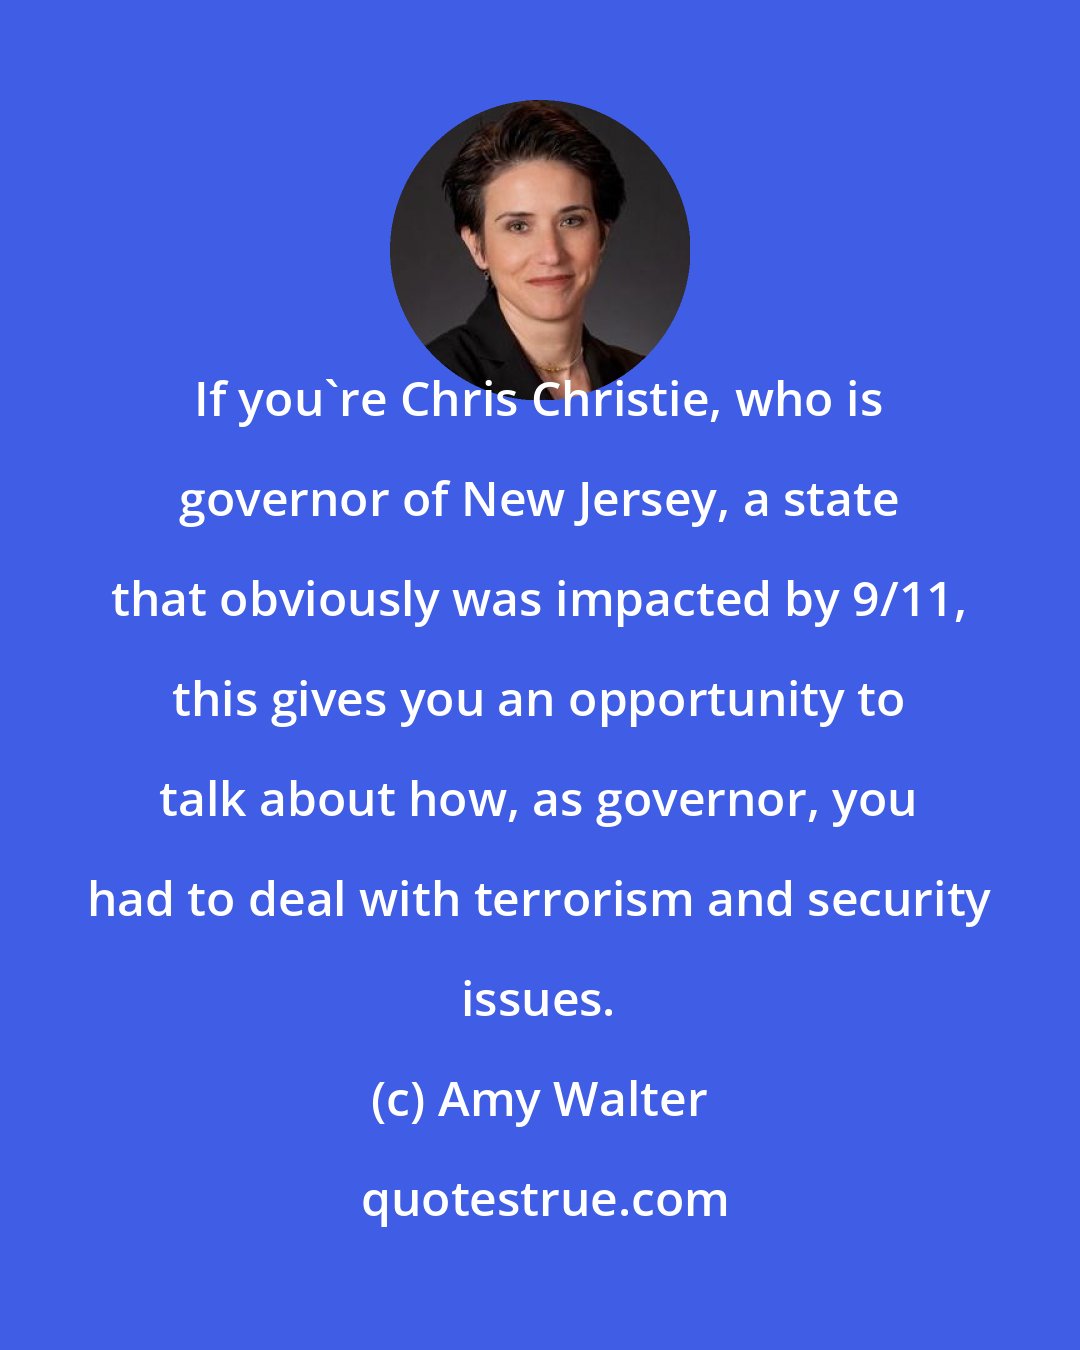 Amy Walter: If you're Chris Christie, who is governor of New Jersey, a state that obviously was impacted by 9/11, this gives you an opportunity to talk about how, as governor, you had to deal with terrorism and security issues.